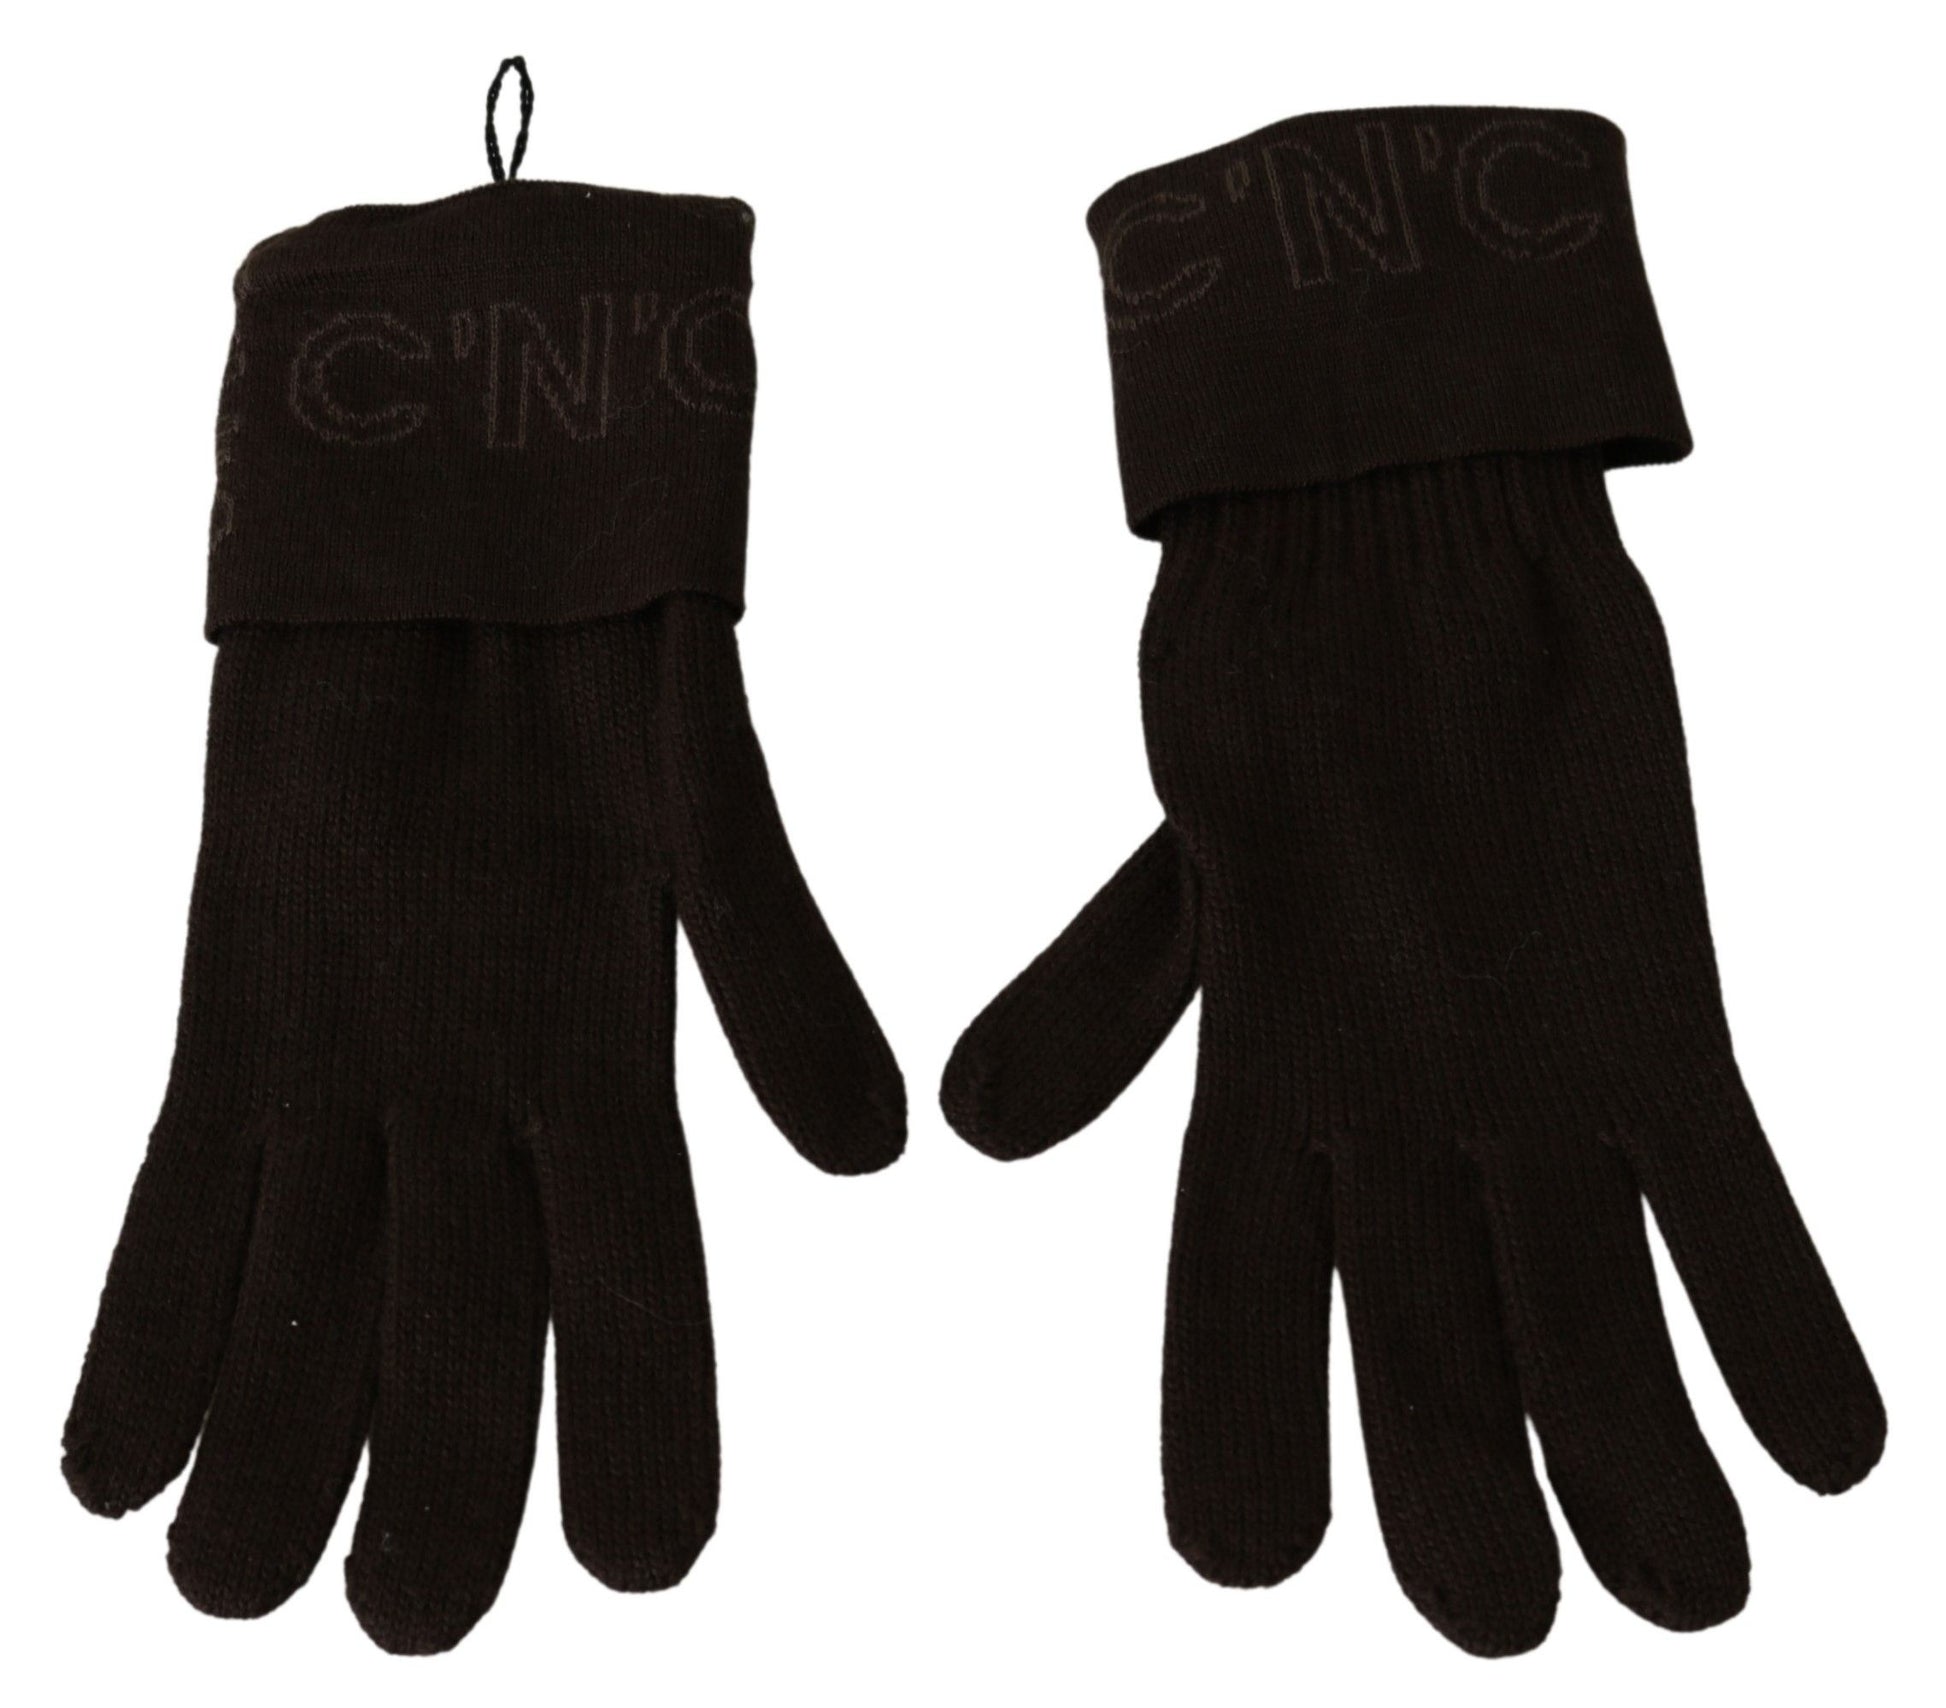 Brown Wool Knitted One Size Wrist Length Gloves - Designed by Costume National Available to Buy at a Discounted Price on Moon Behind The Hill Online Designer Discount Store